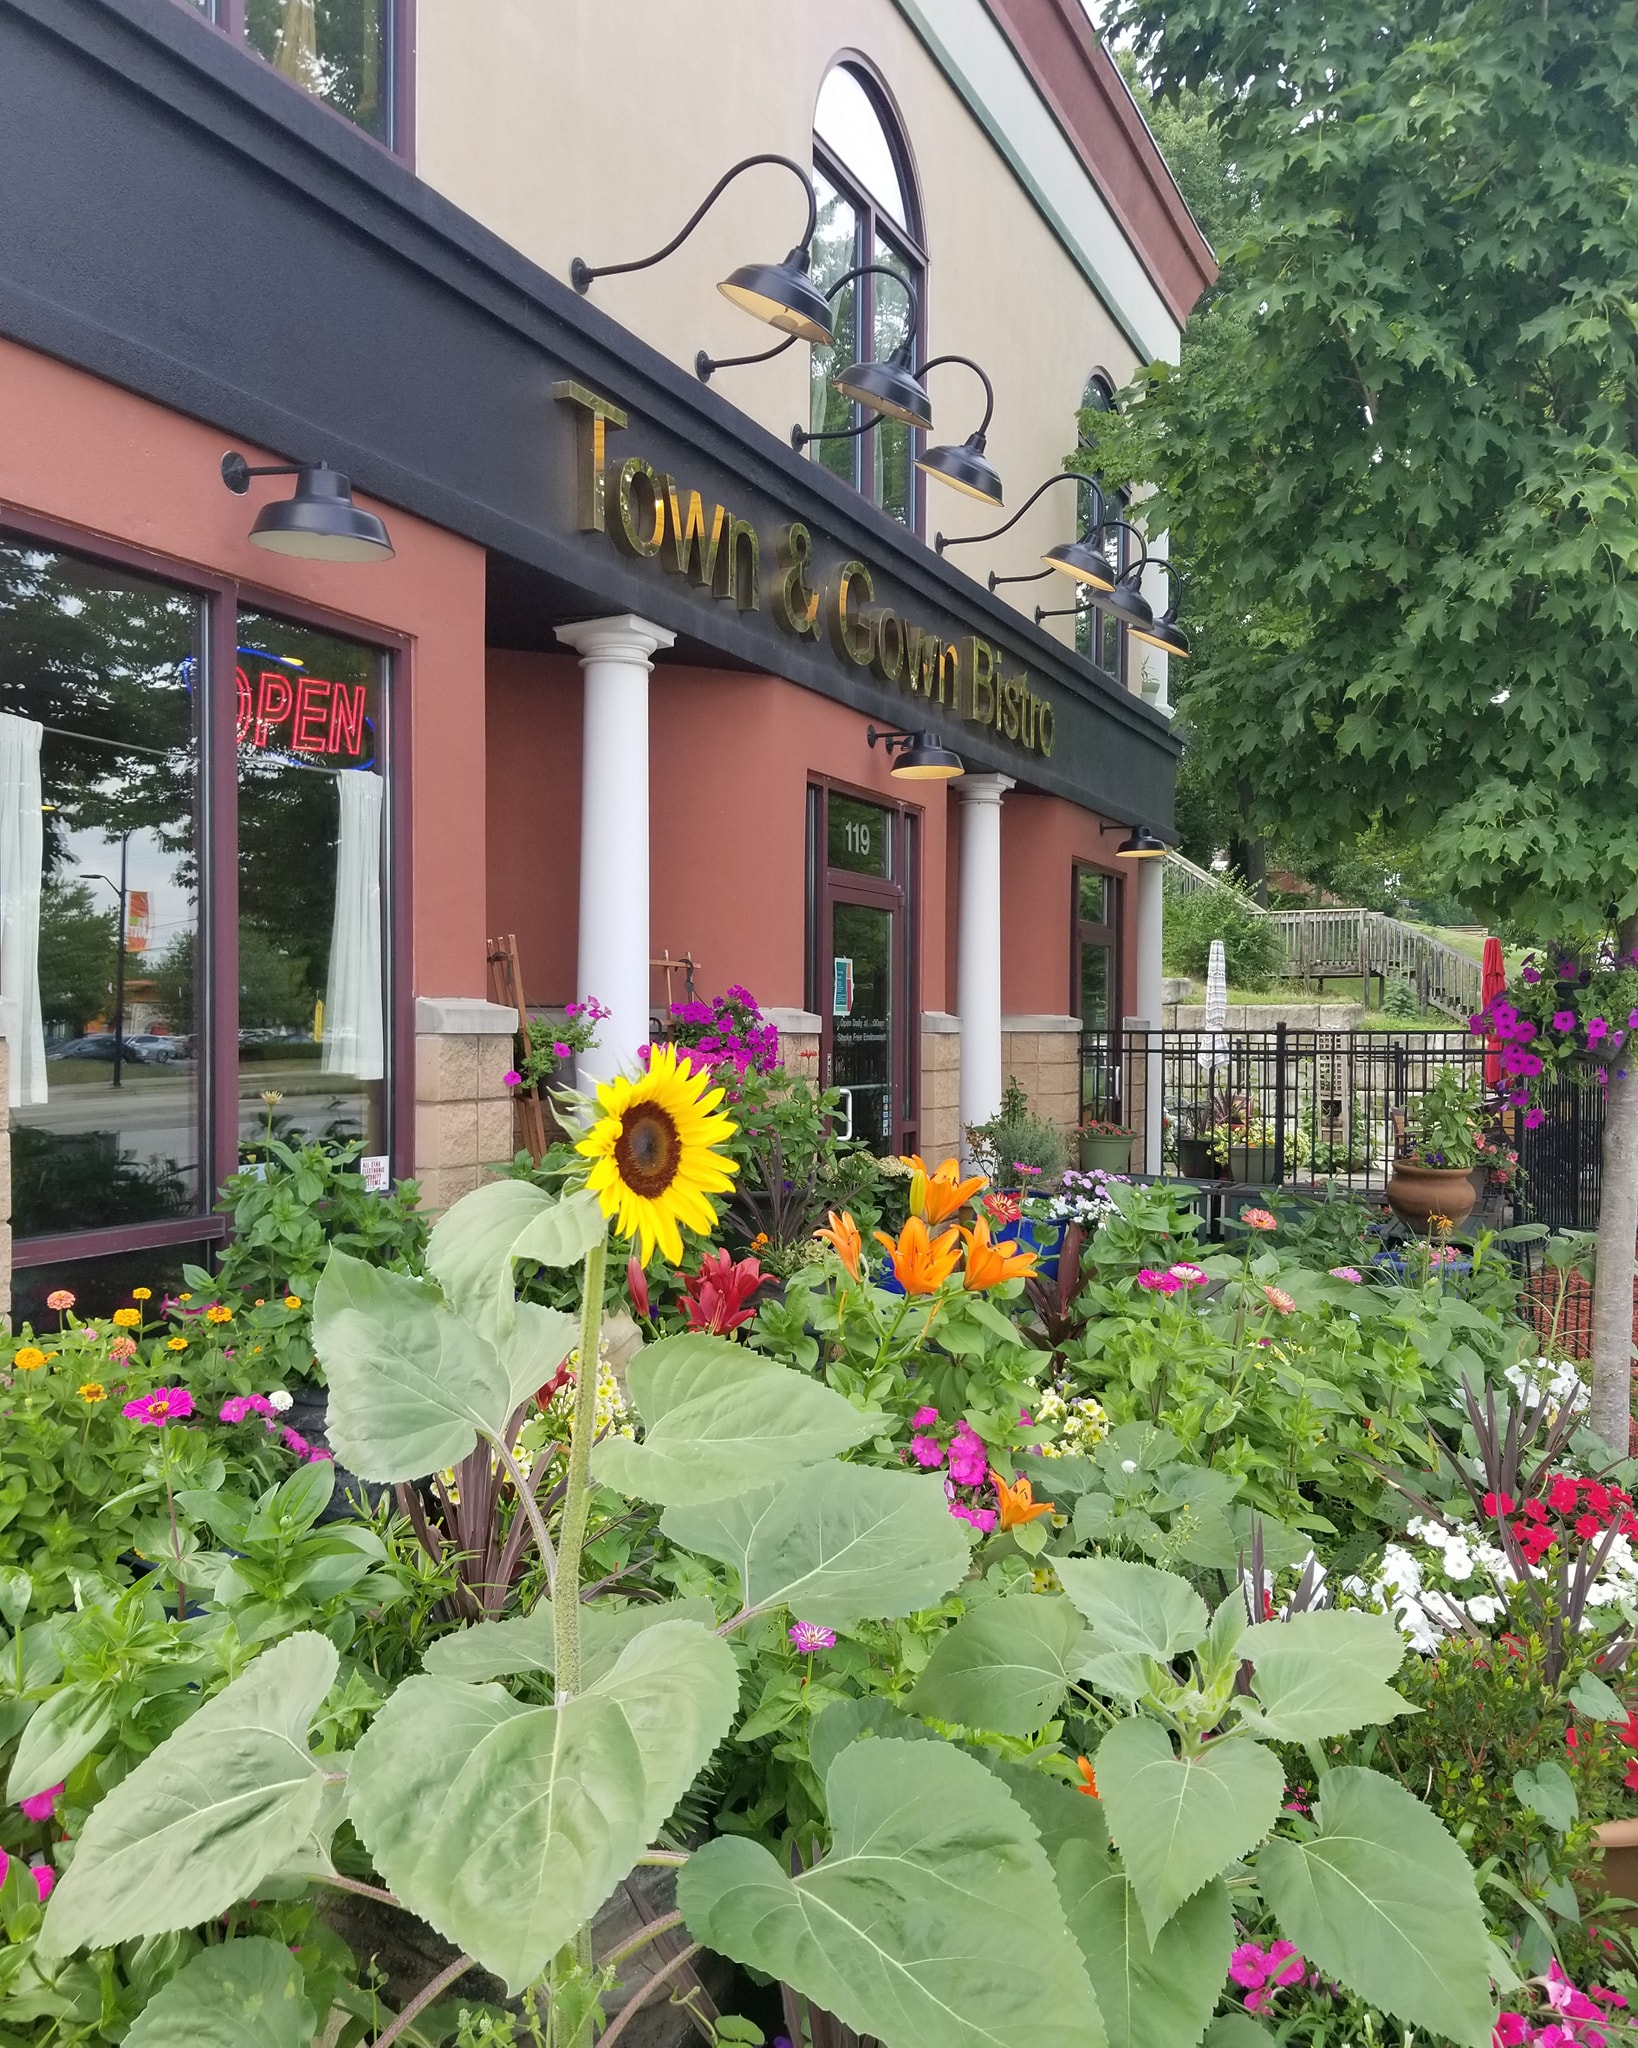 An outside photo of the front of the restaurant with many flowers including a sunflower